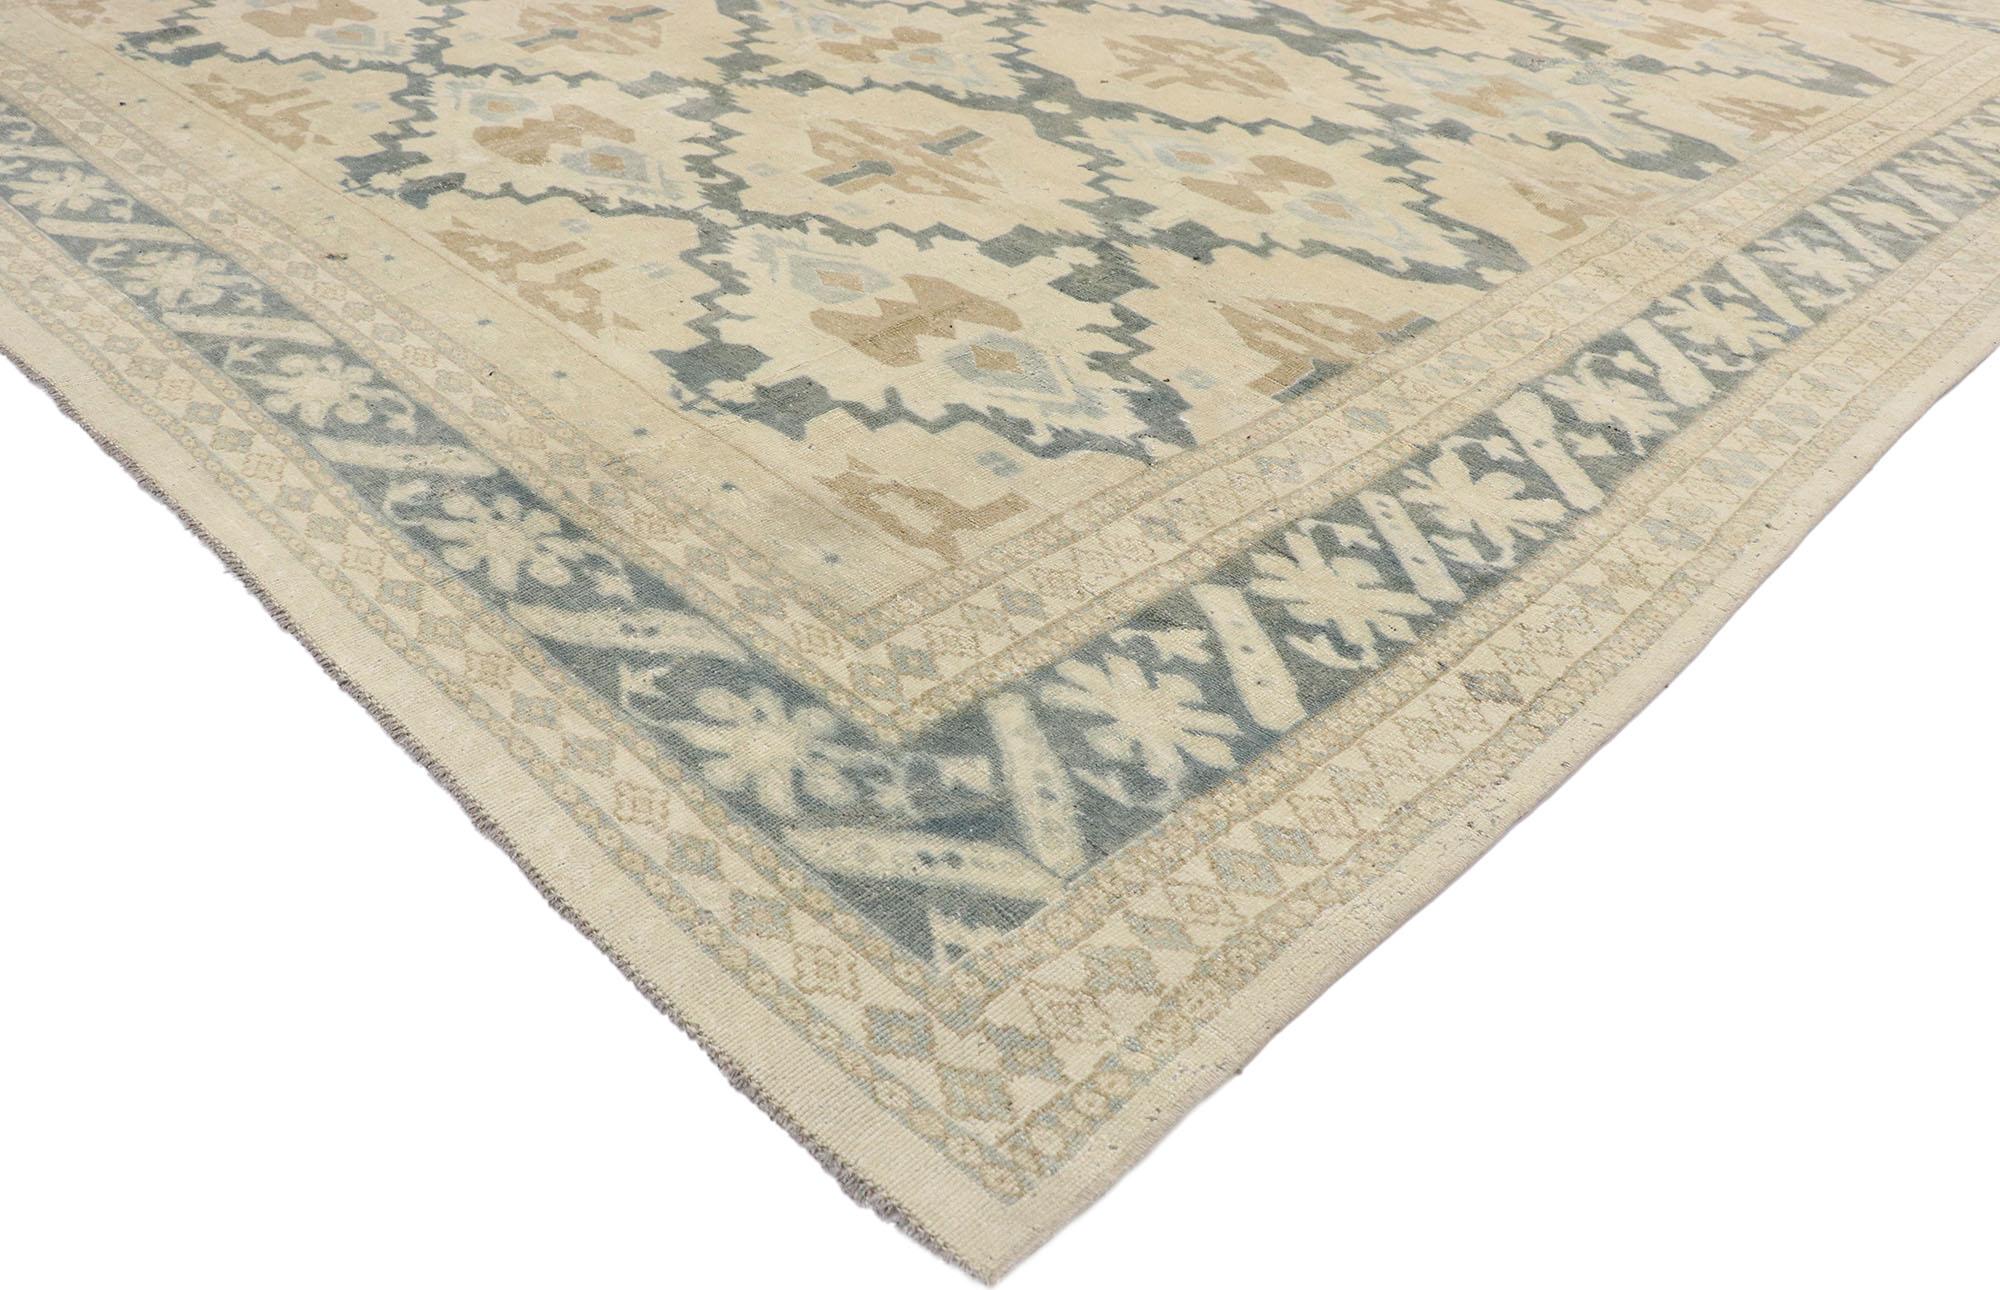 Hand-Knotted Distressed Vintage Turkish Oushak Rug with Coastal Arts & Crafts Style